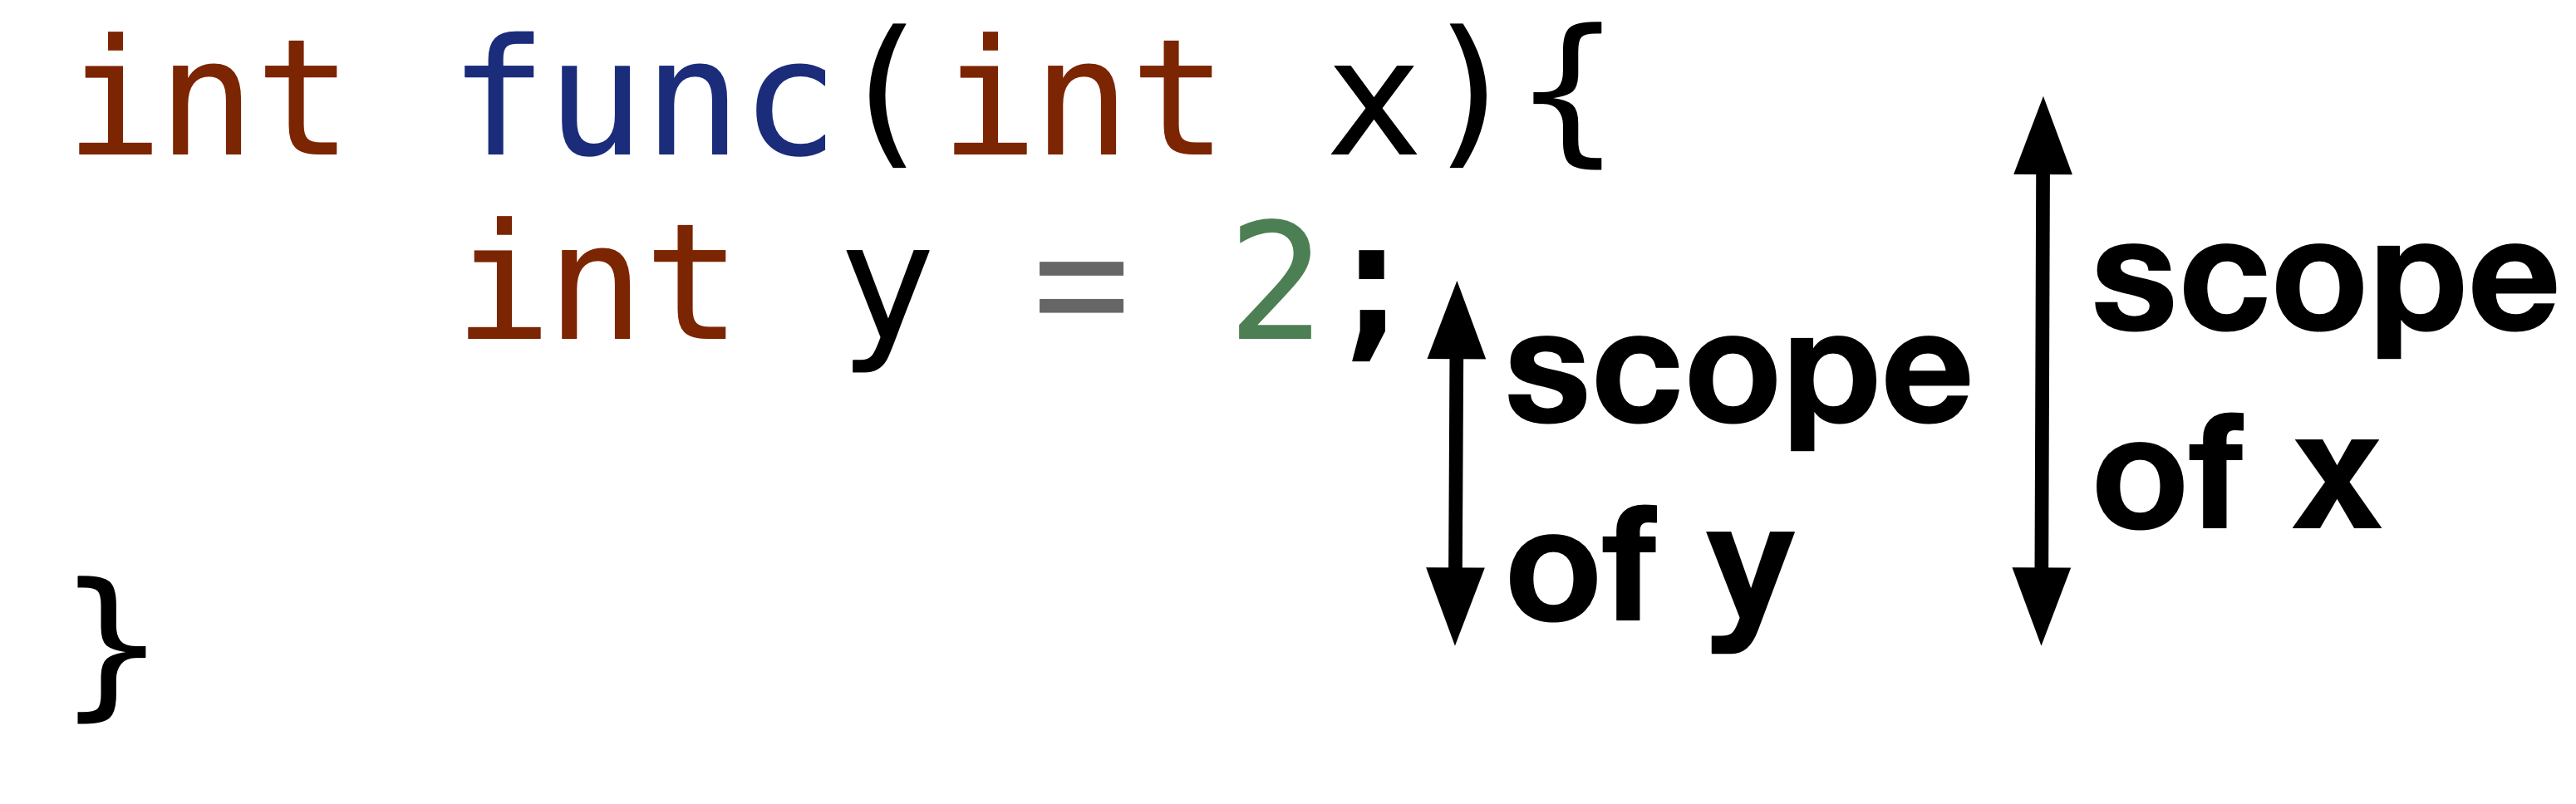 Scope of x and y in function func.